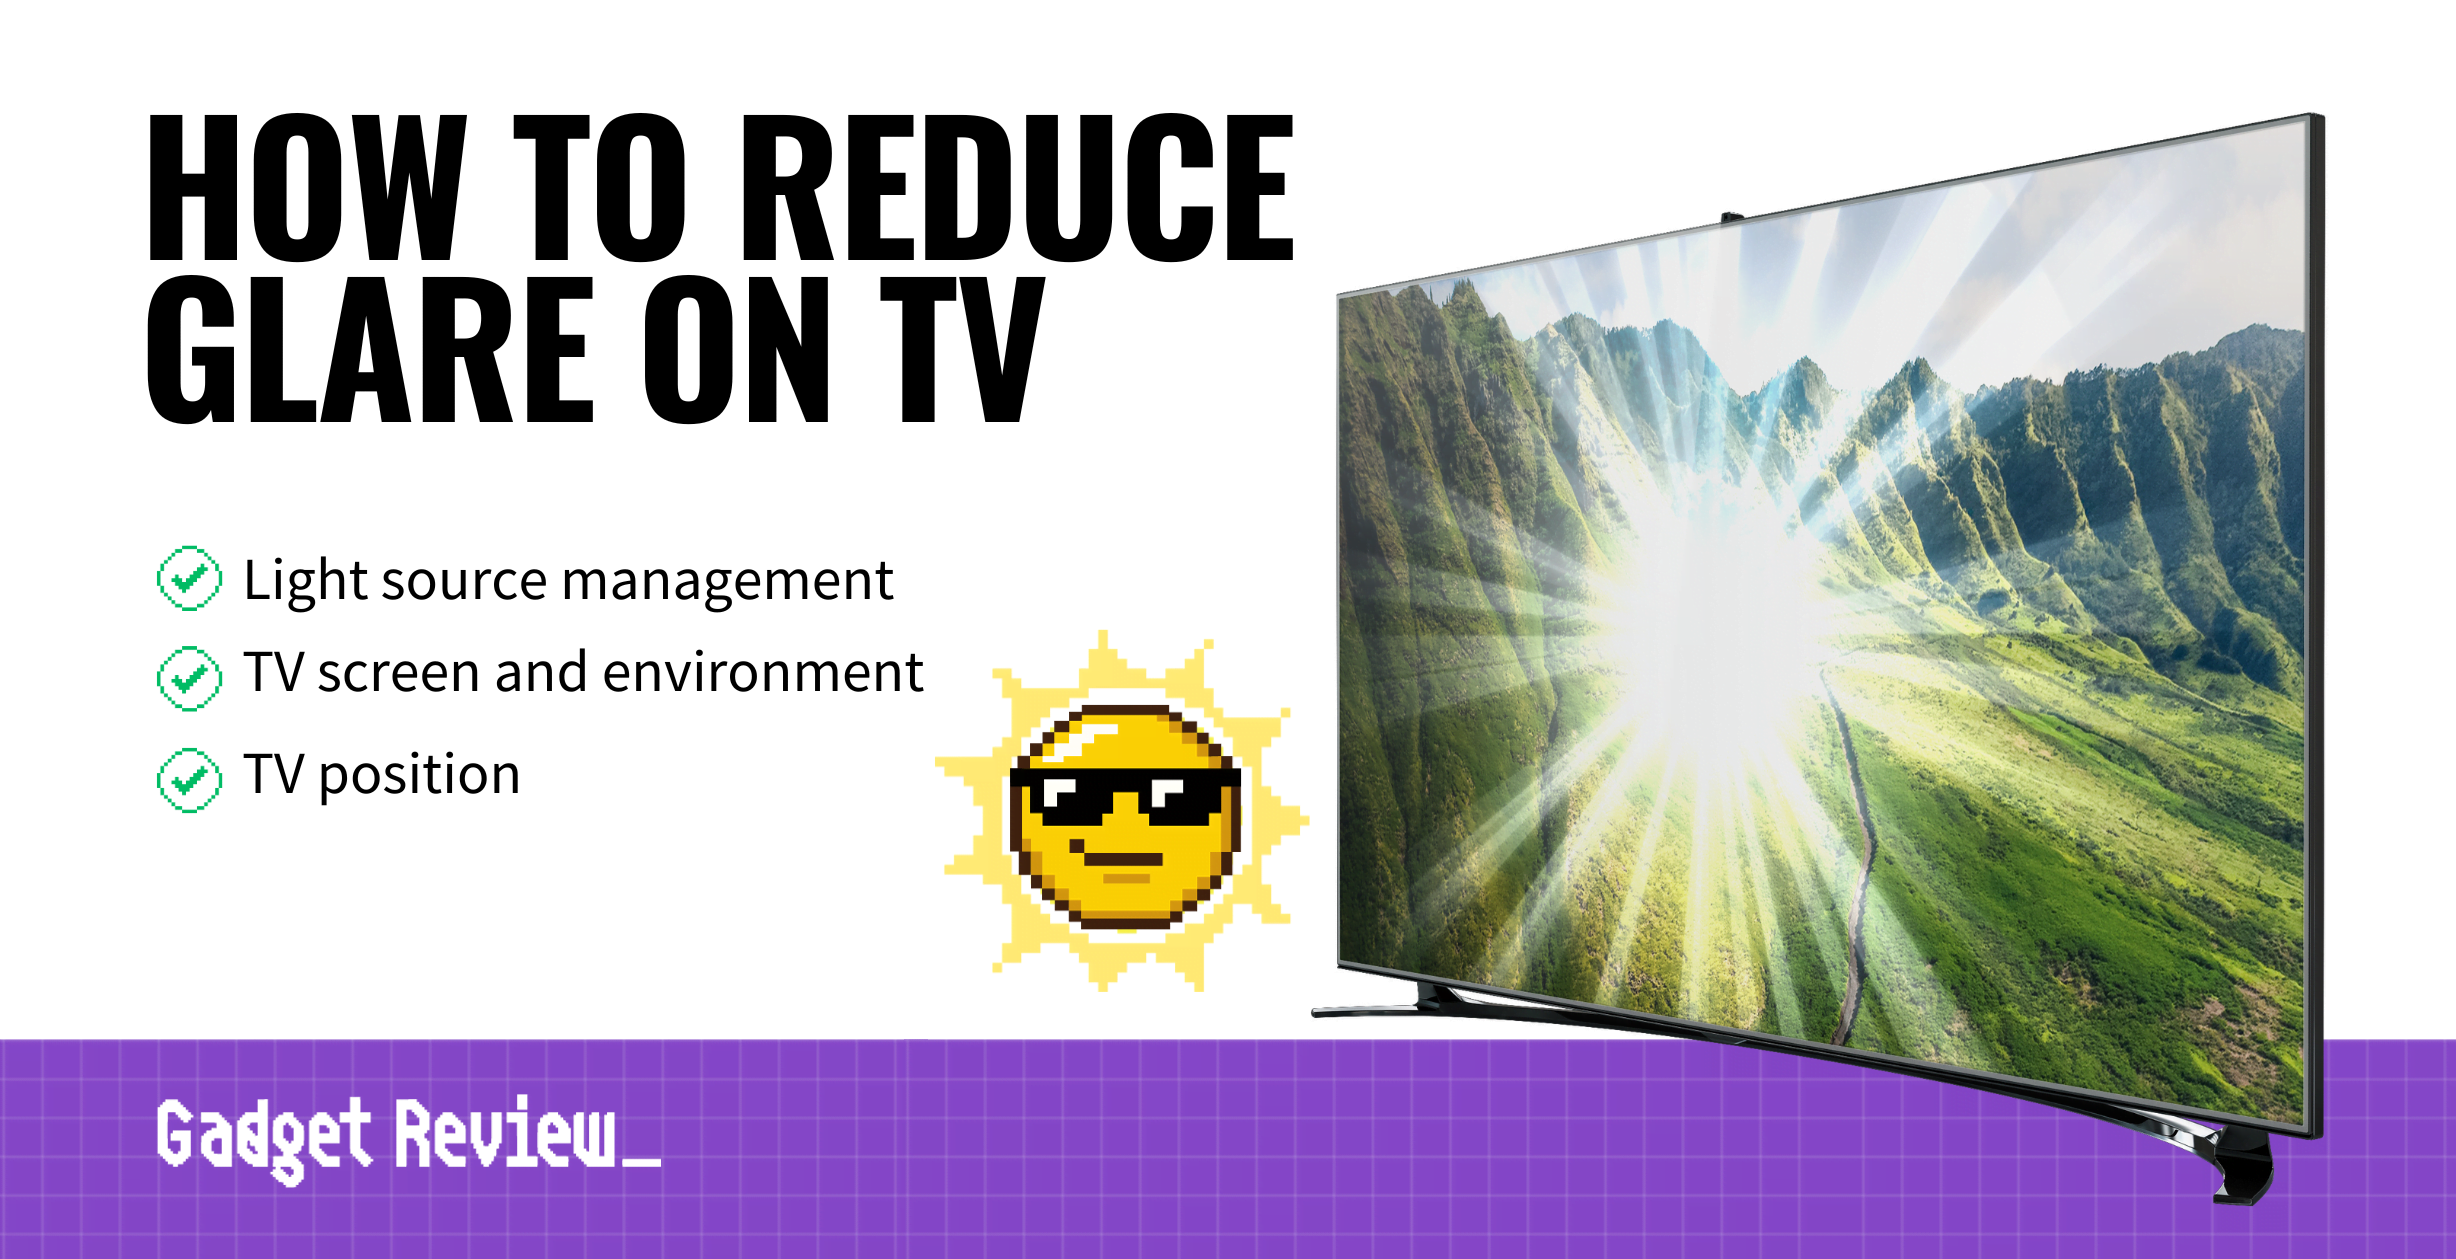 How to Reduce Glare on TV